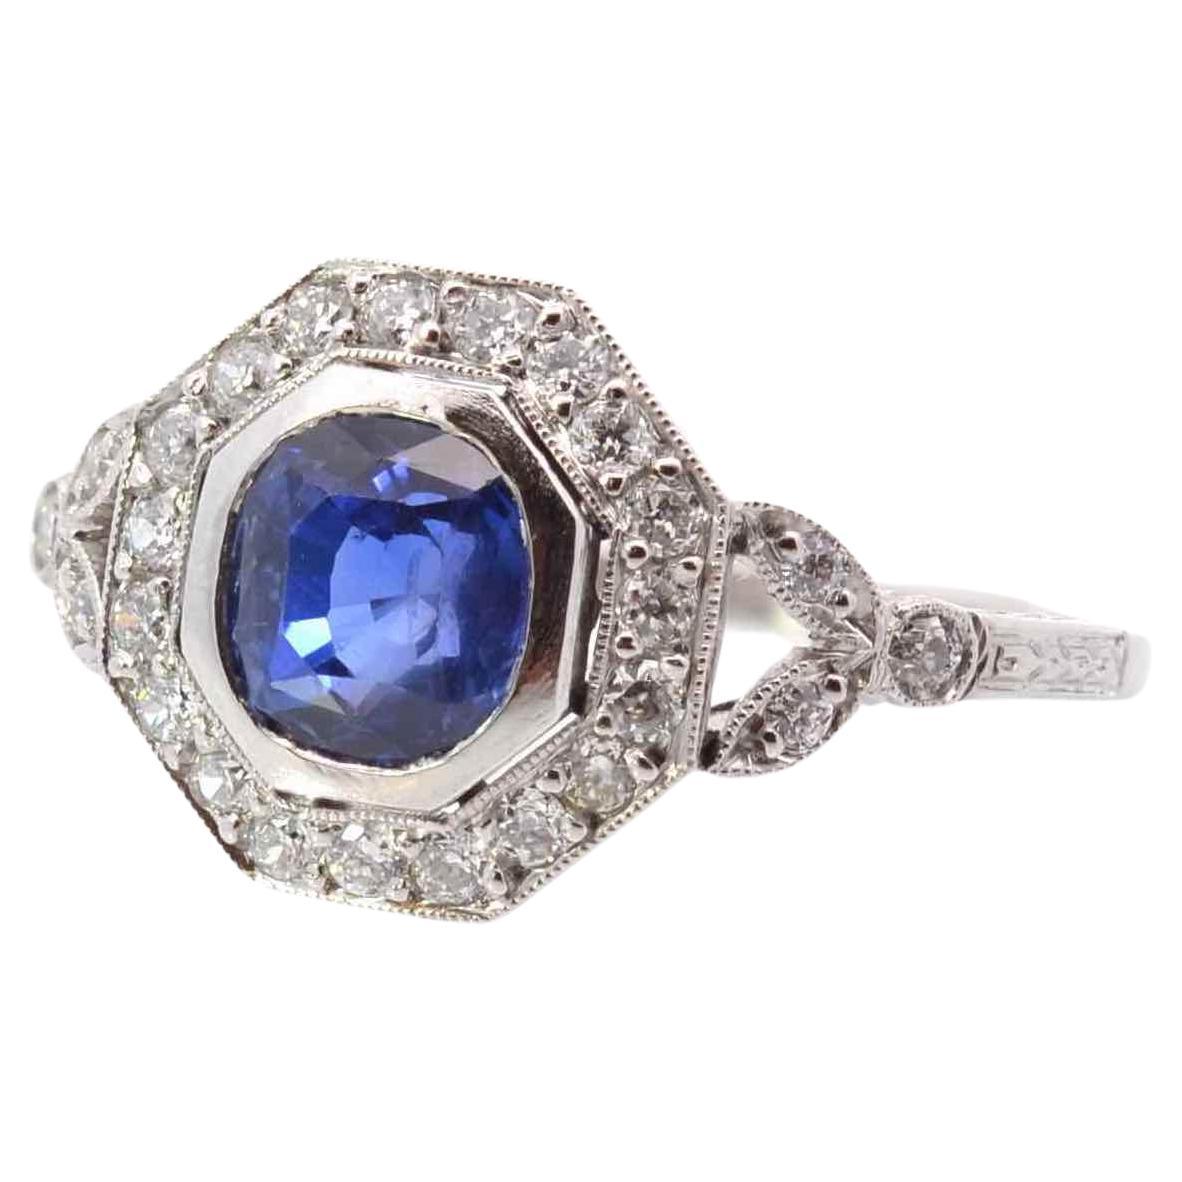 Art déco style sapphire and diamonds ring in platinum